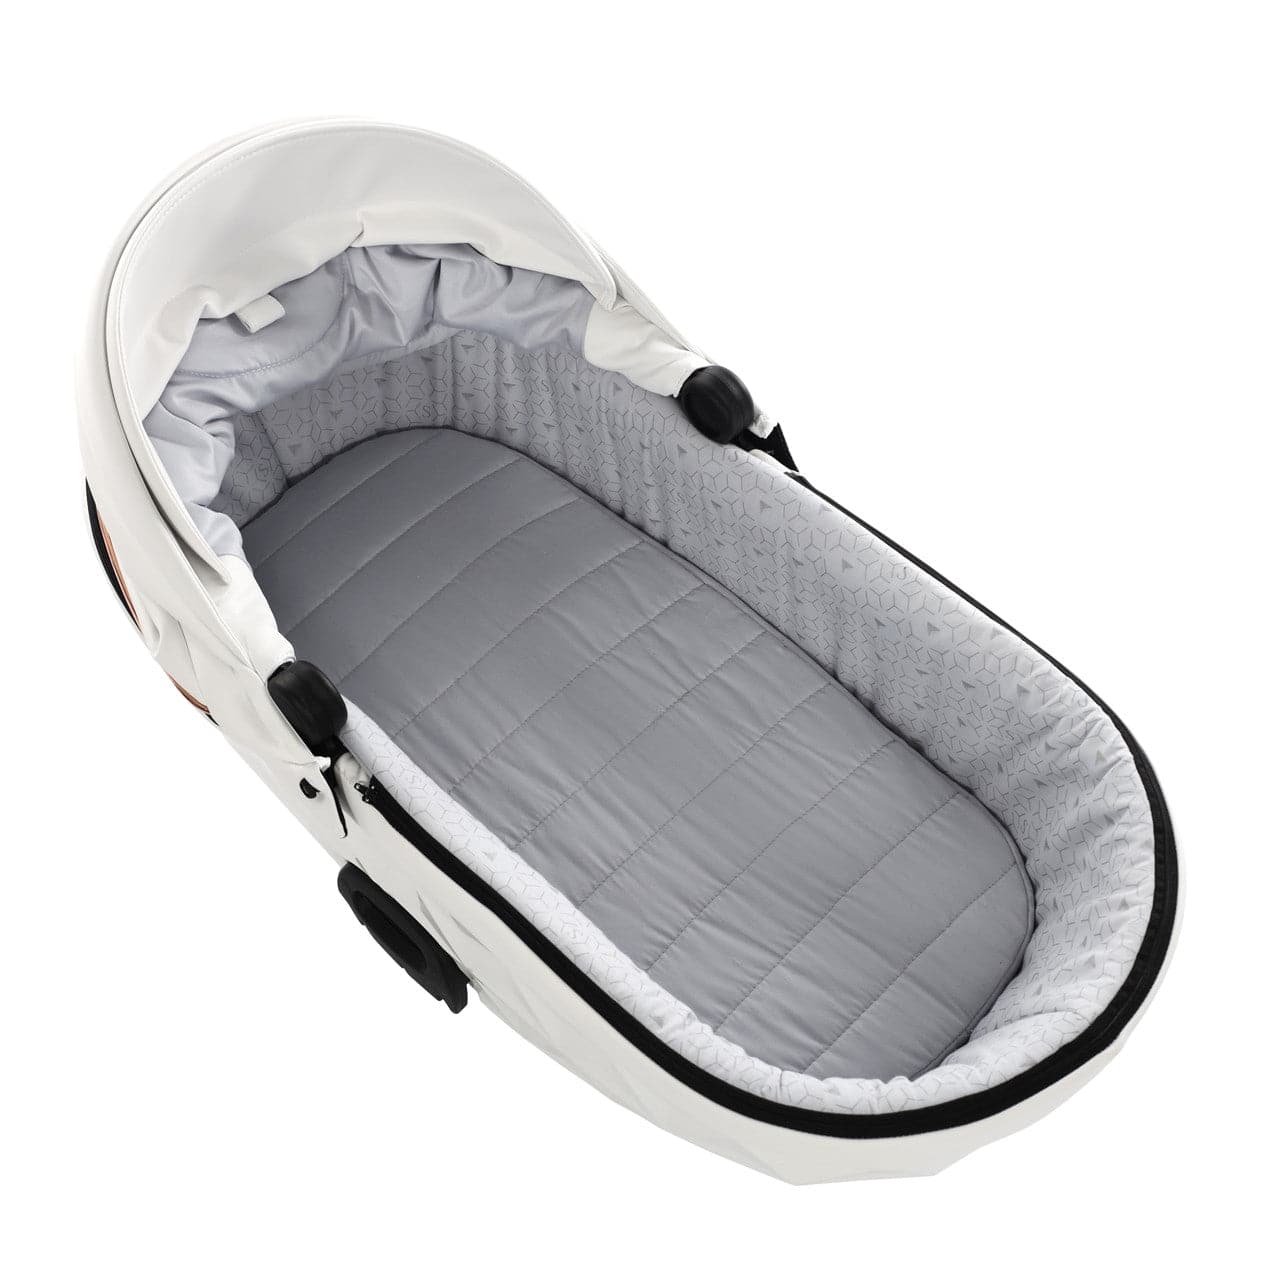 Junama S-Class 3 In 1 Travel System - White - For Your Little One